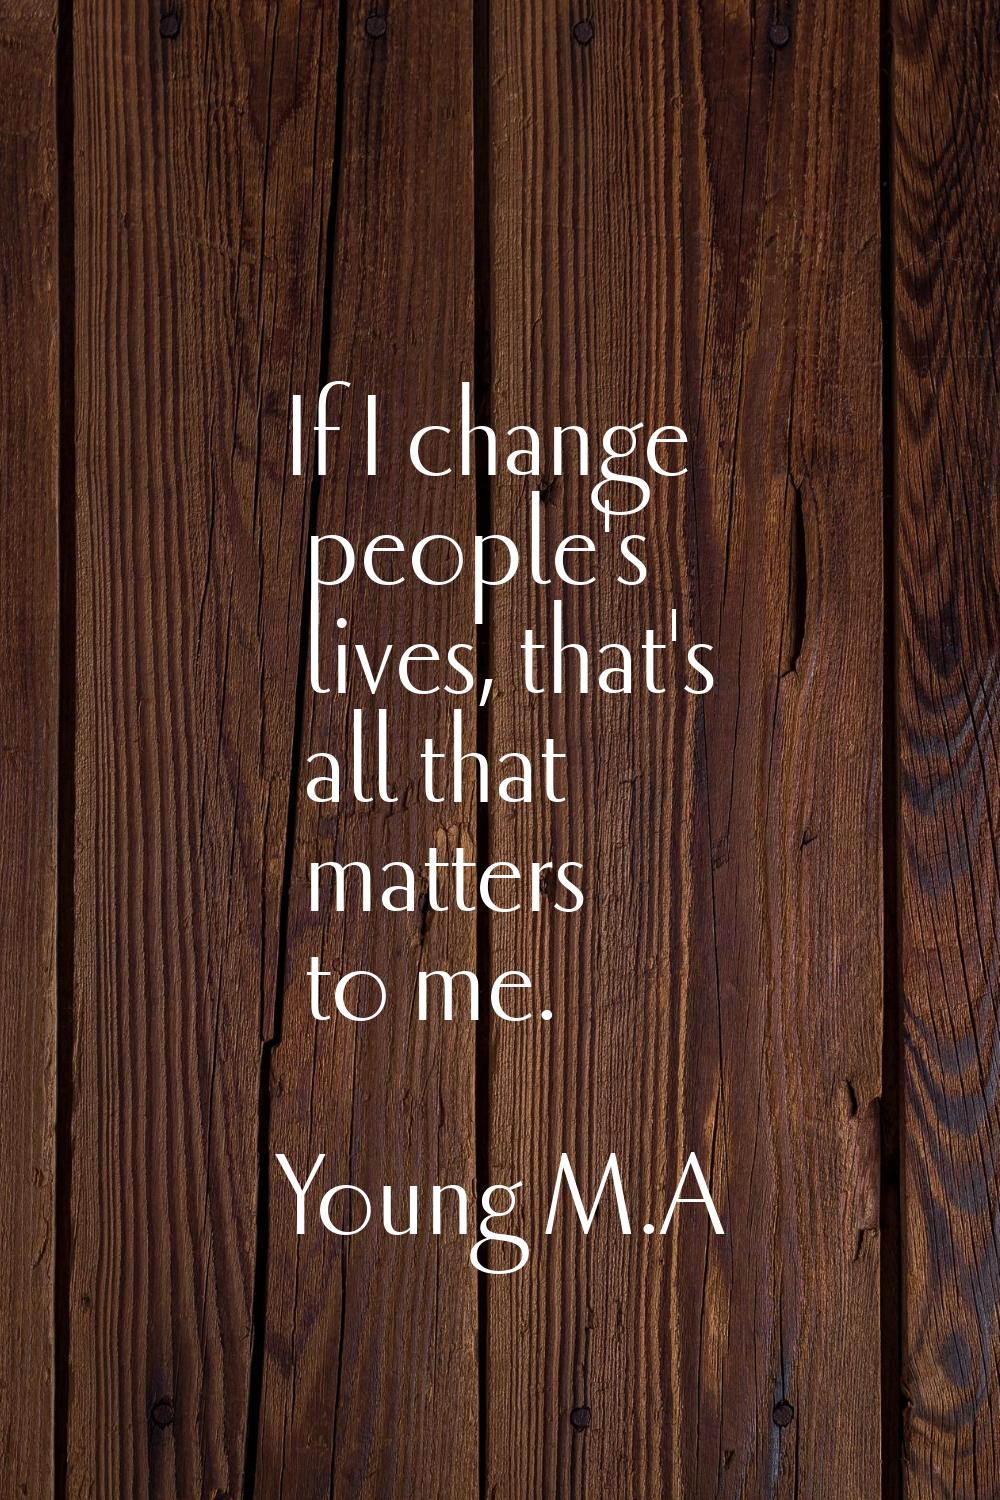 If I change people's lives, that's all that matters to me.